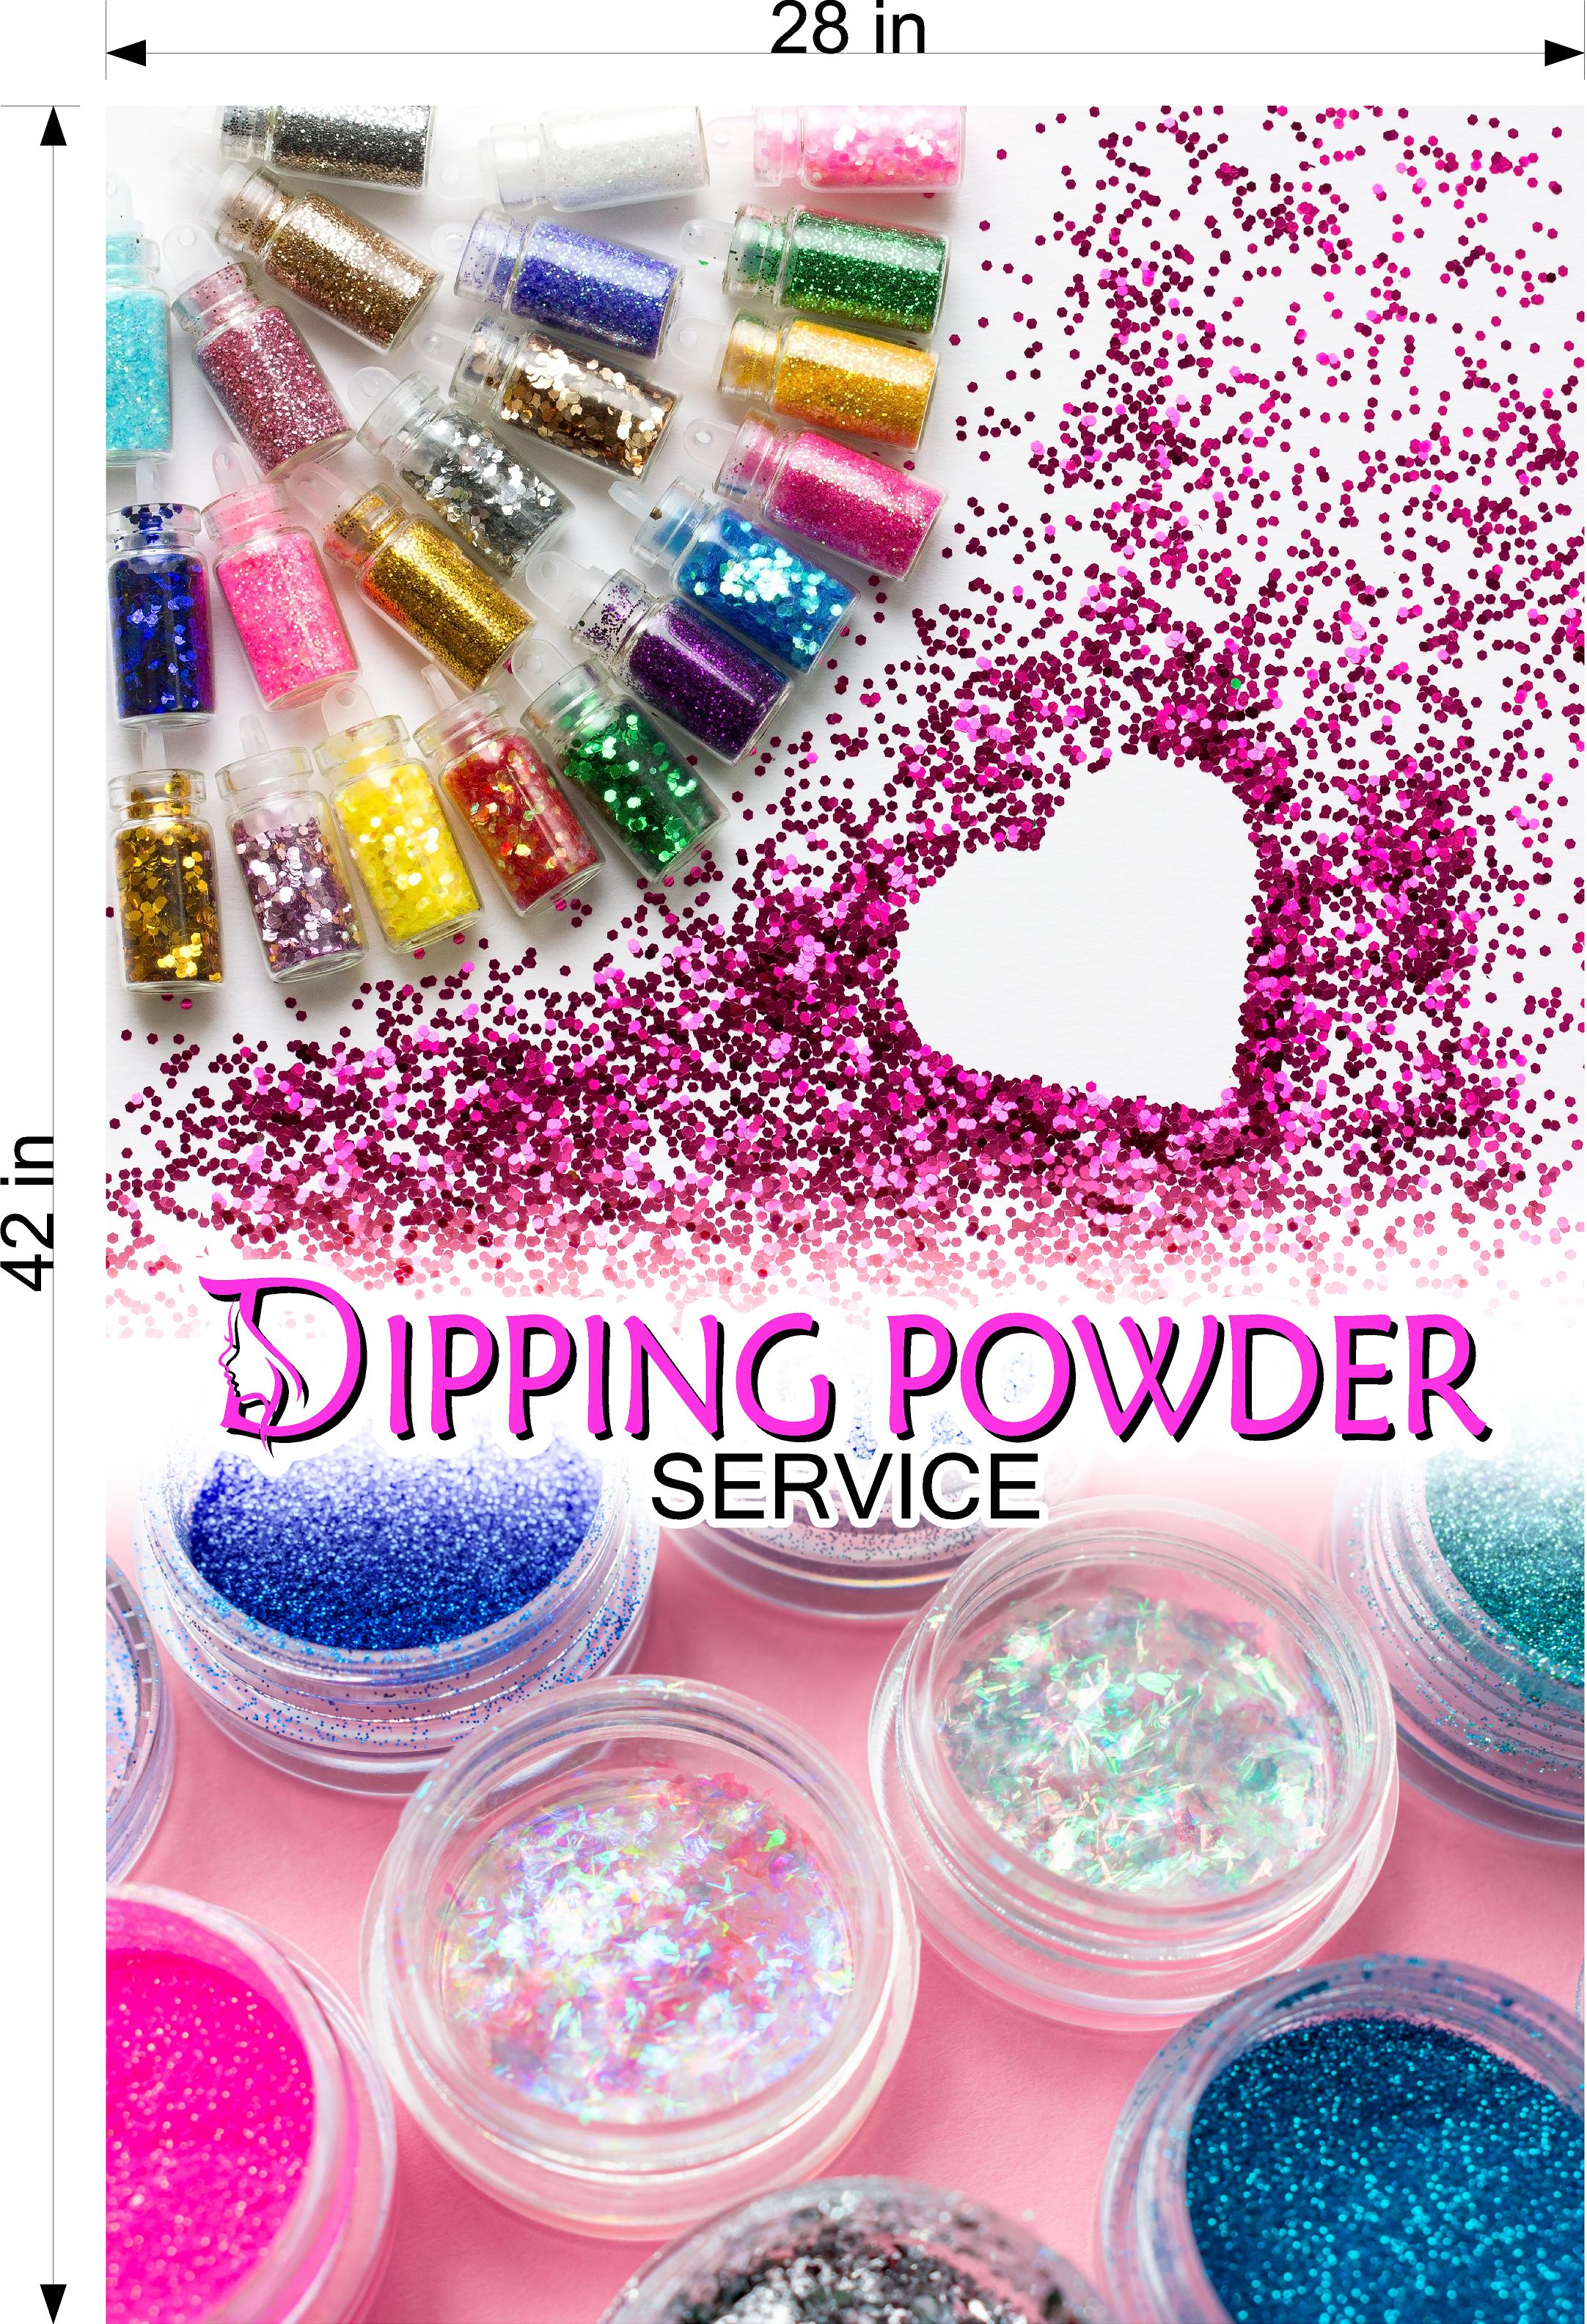 Dipping Powder 07 Wallpaper Poster Decal with Adhesive Backing Wall Sticker Decor Nail Salon Sign Vertical